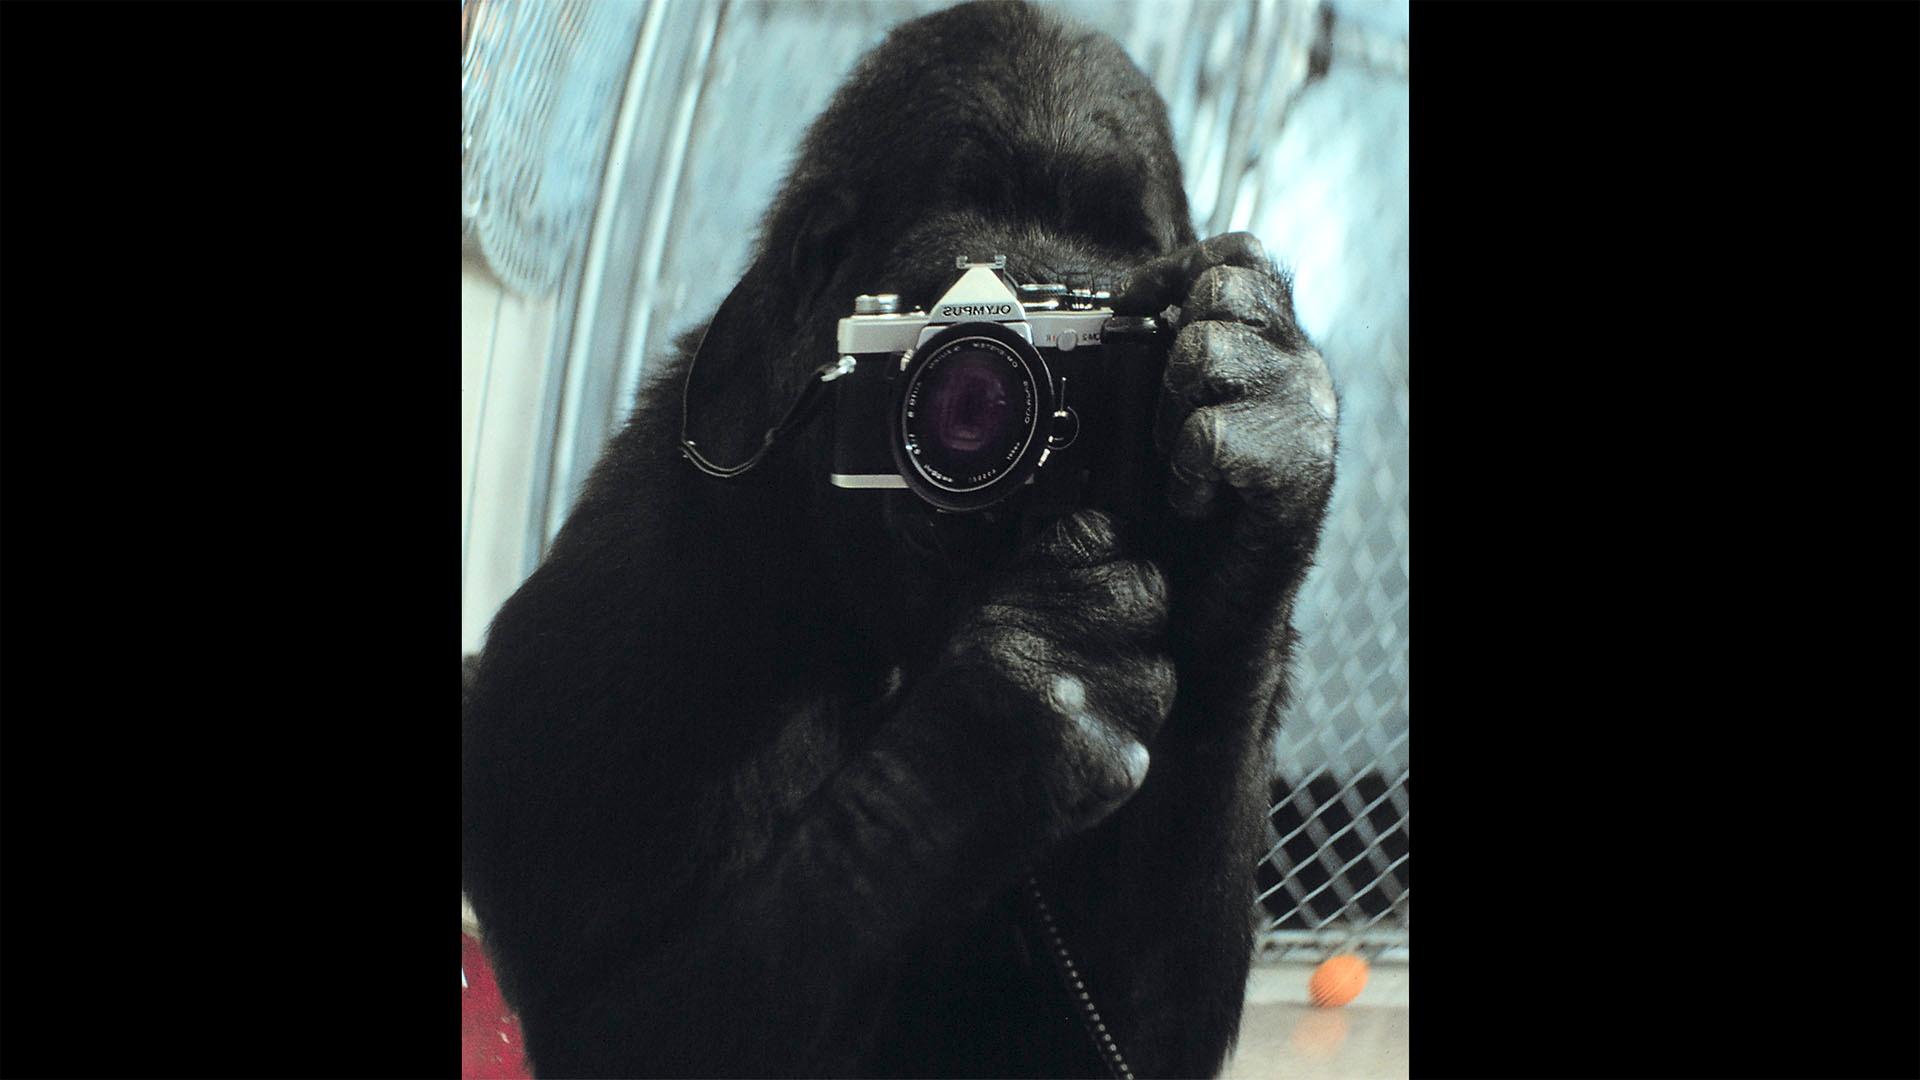 Koko taking a picture of herself in the mirror.